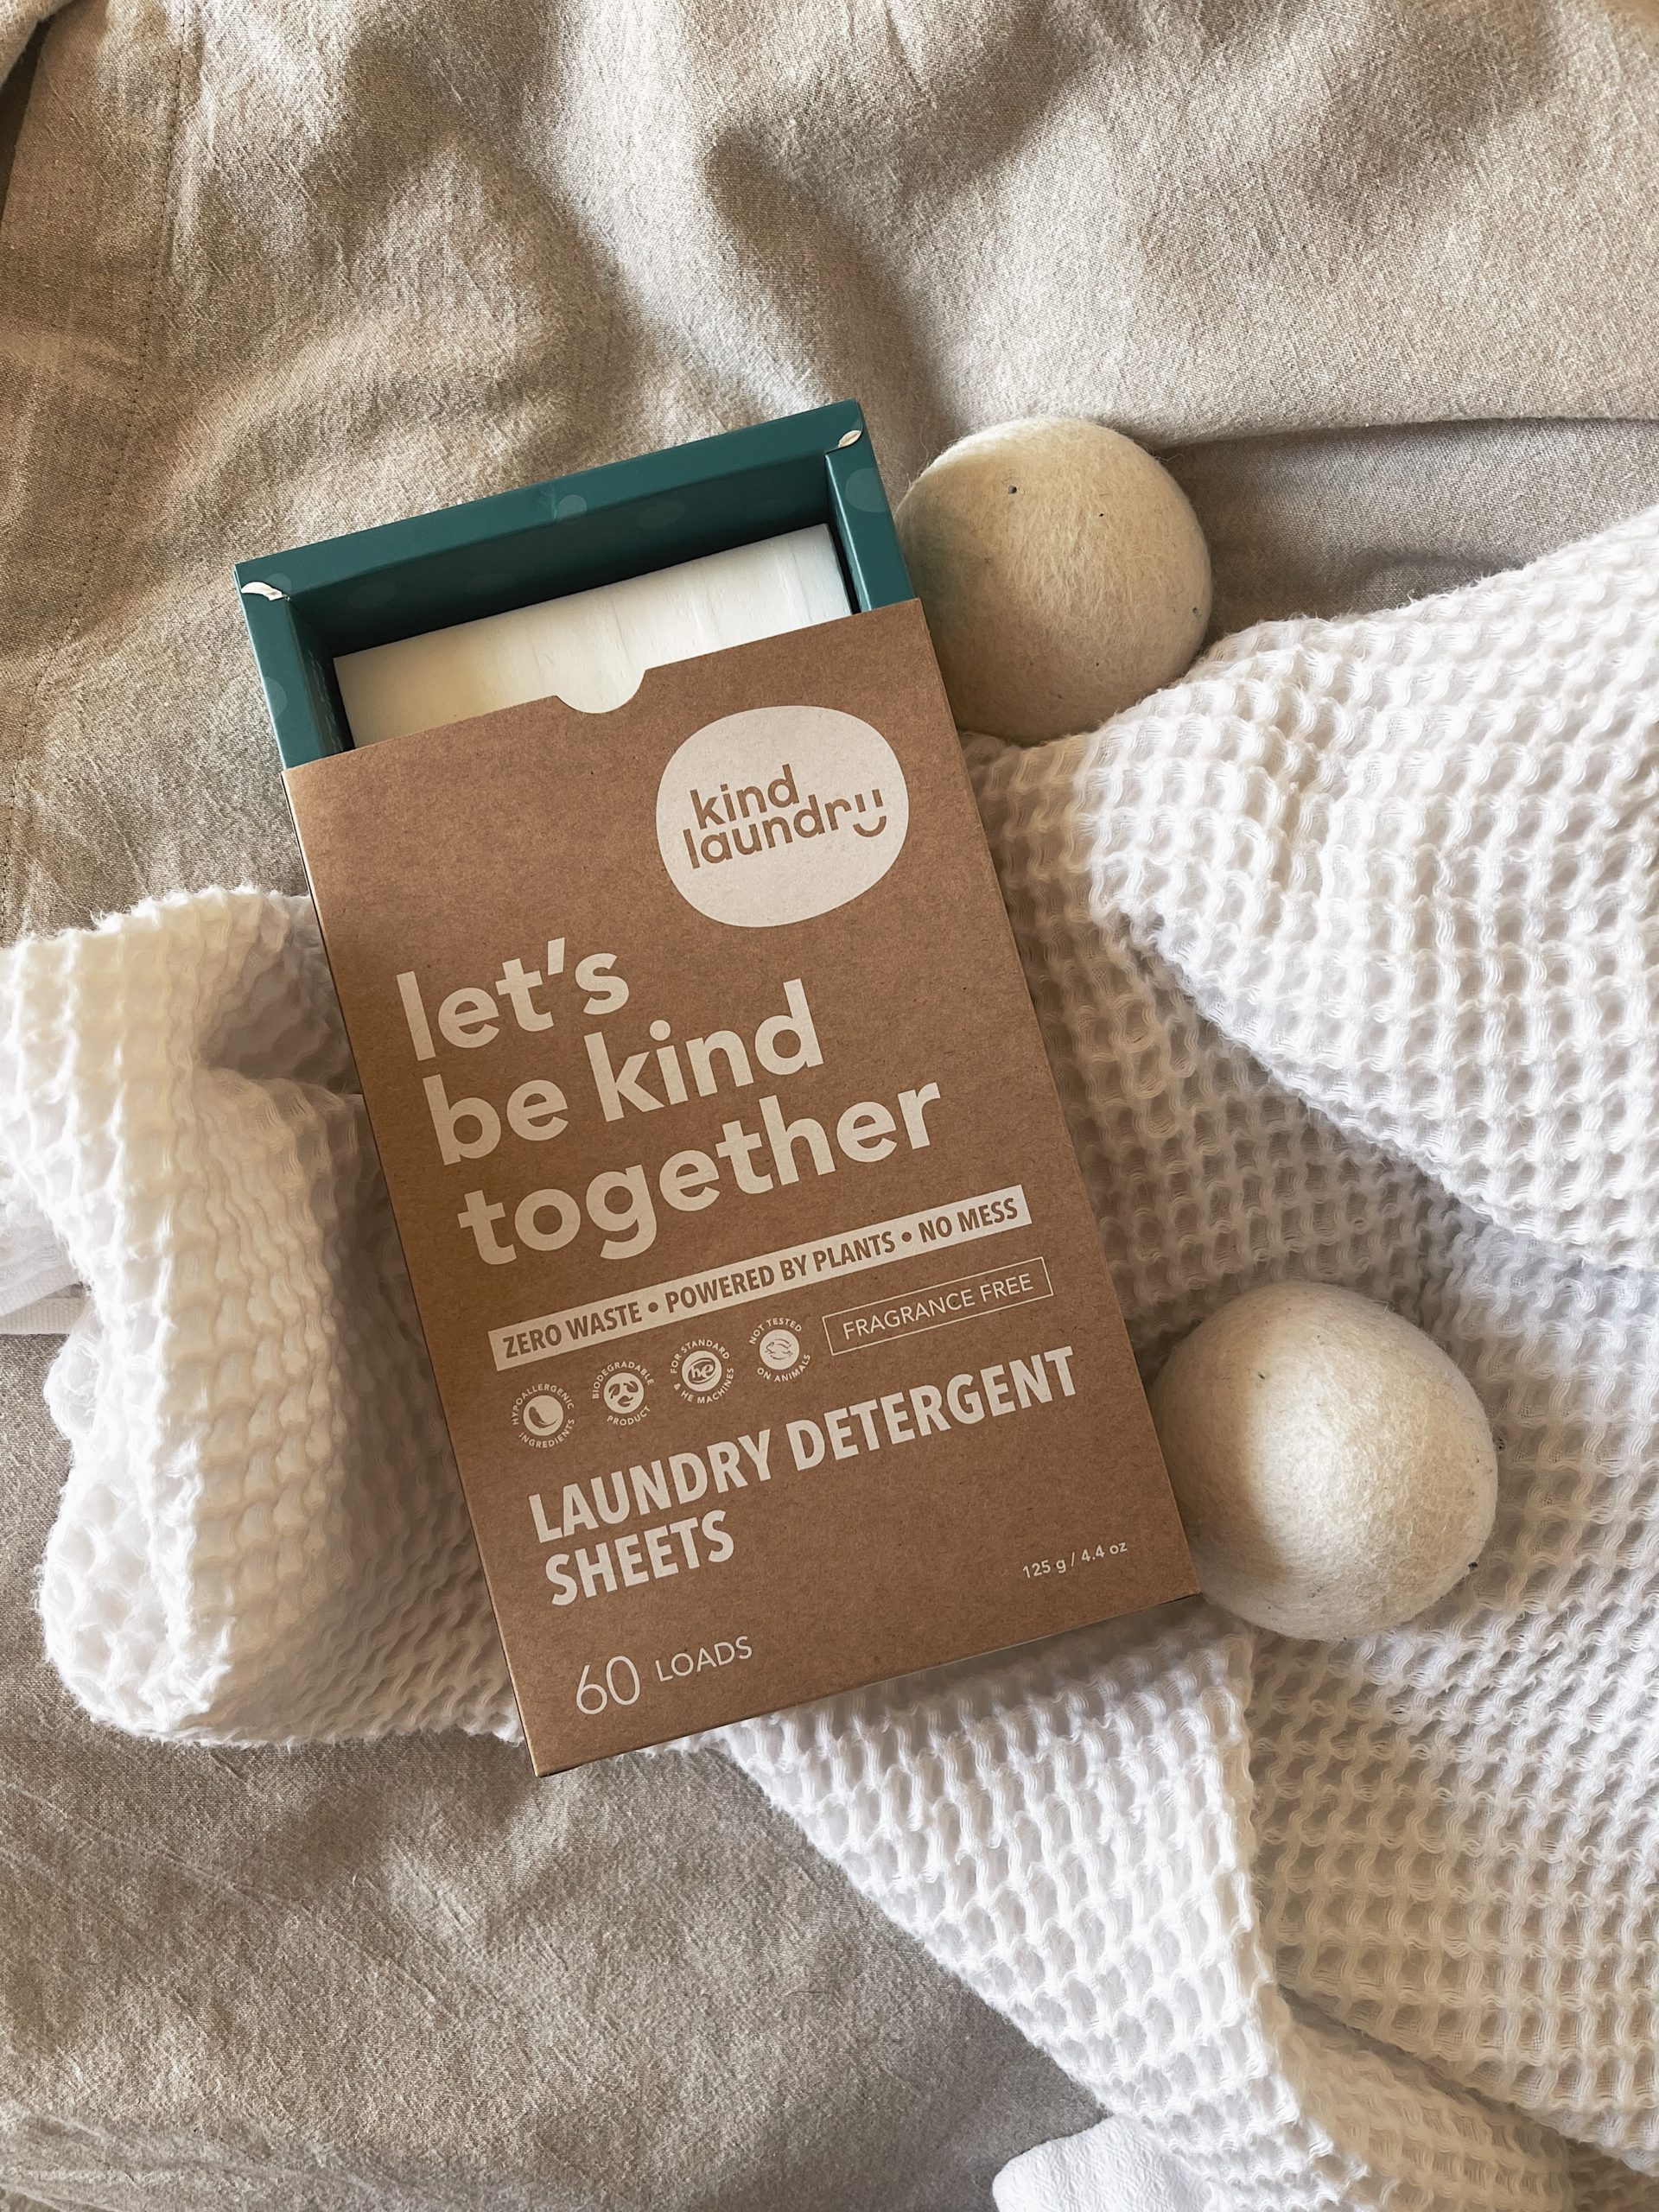 Kind Laundry Sheet Review | The HIve